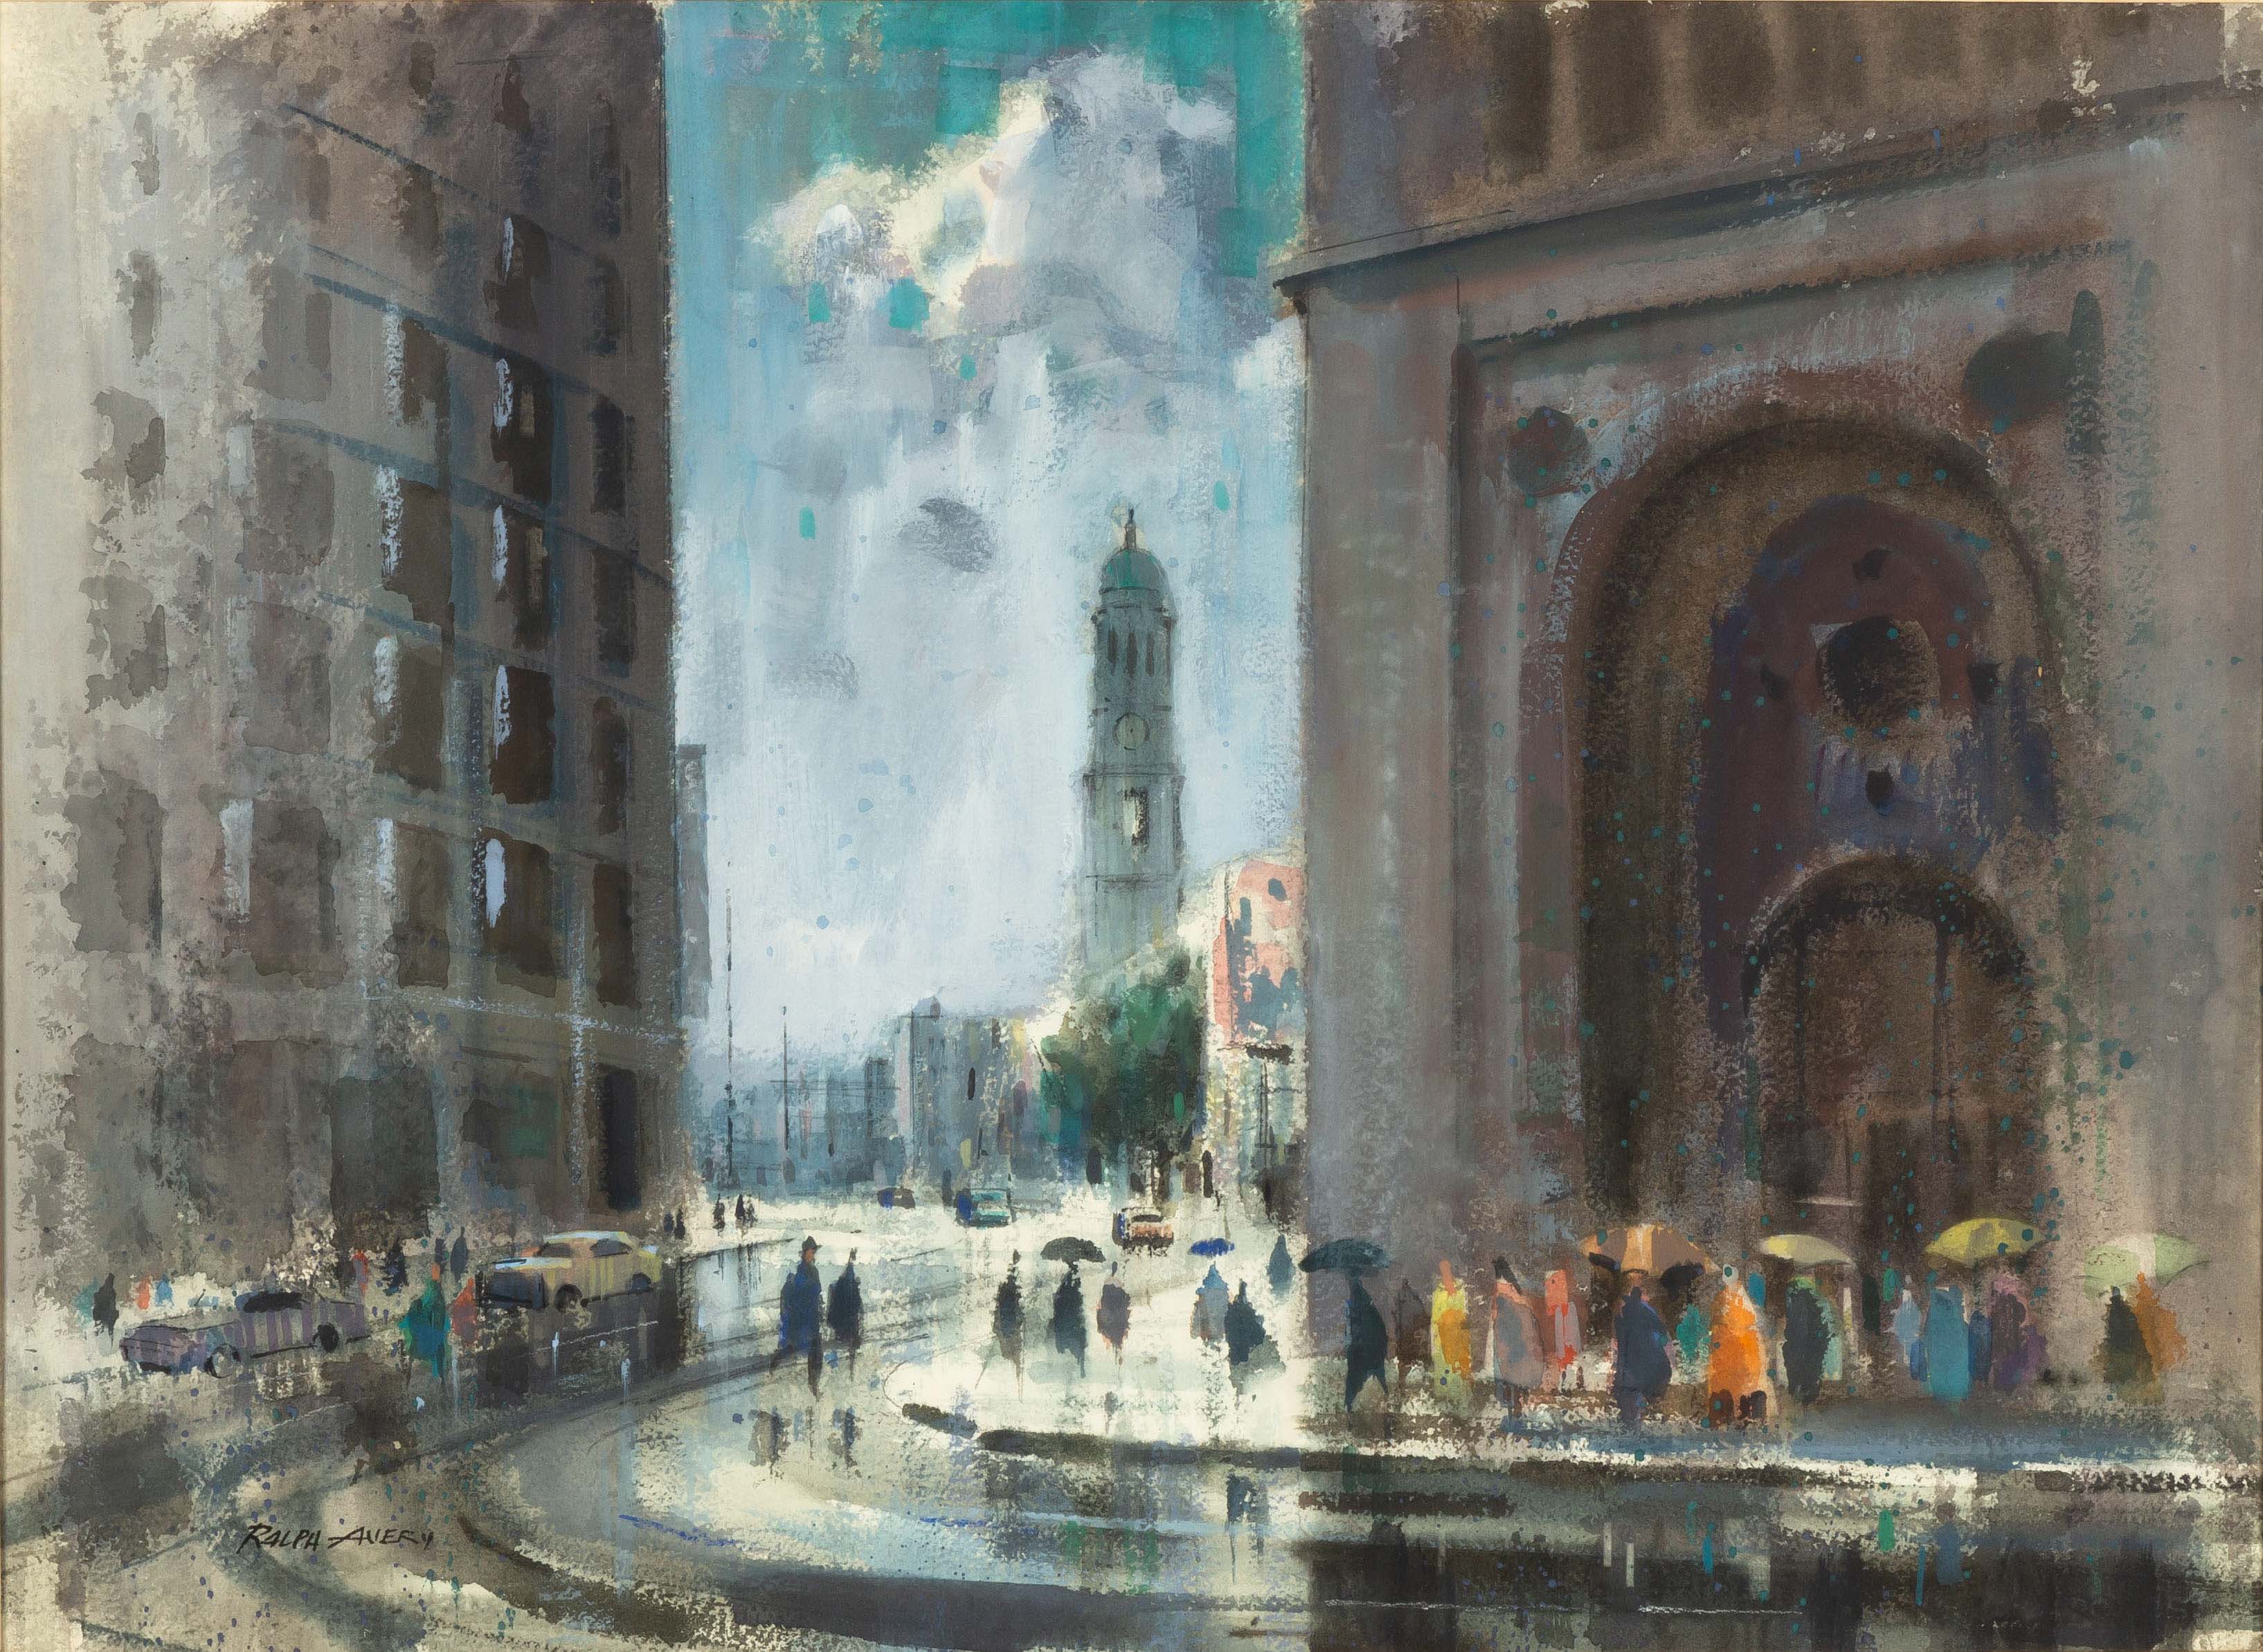 Ralph (American, 1906-1976) Rochester Savings Bank and St. Joseph's Church | Cottone Auctions